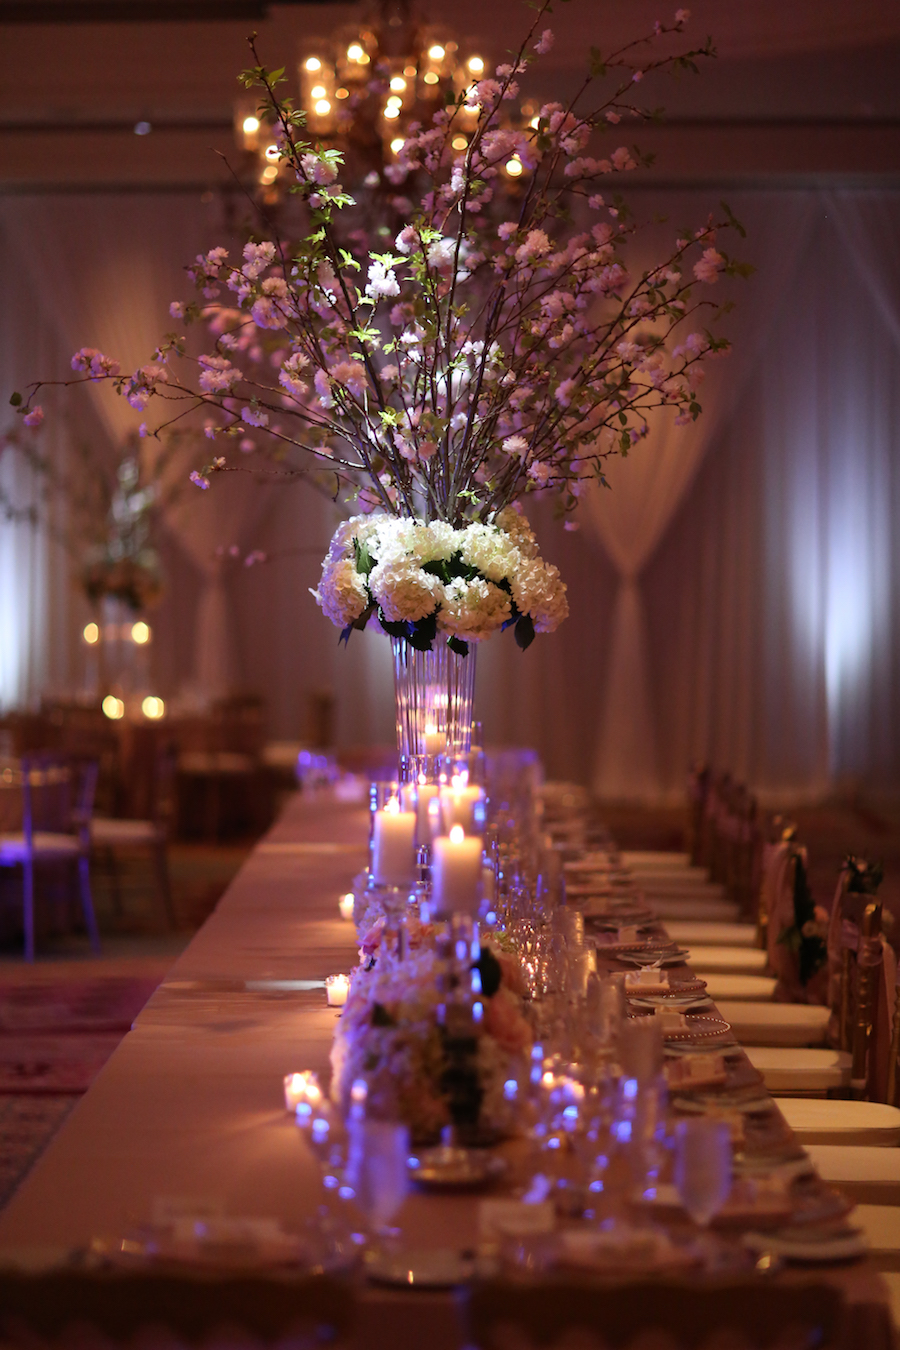 Blush Pink and White Floral Wedding Reception Centerpieces with Cherry Blossom Branches with Candlelight at Long Feasting Table | Sarasota Wedding Venue Ritz Carlton